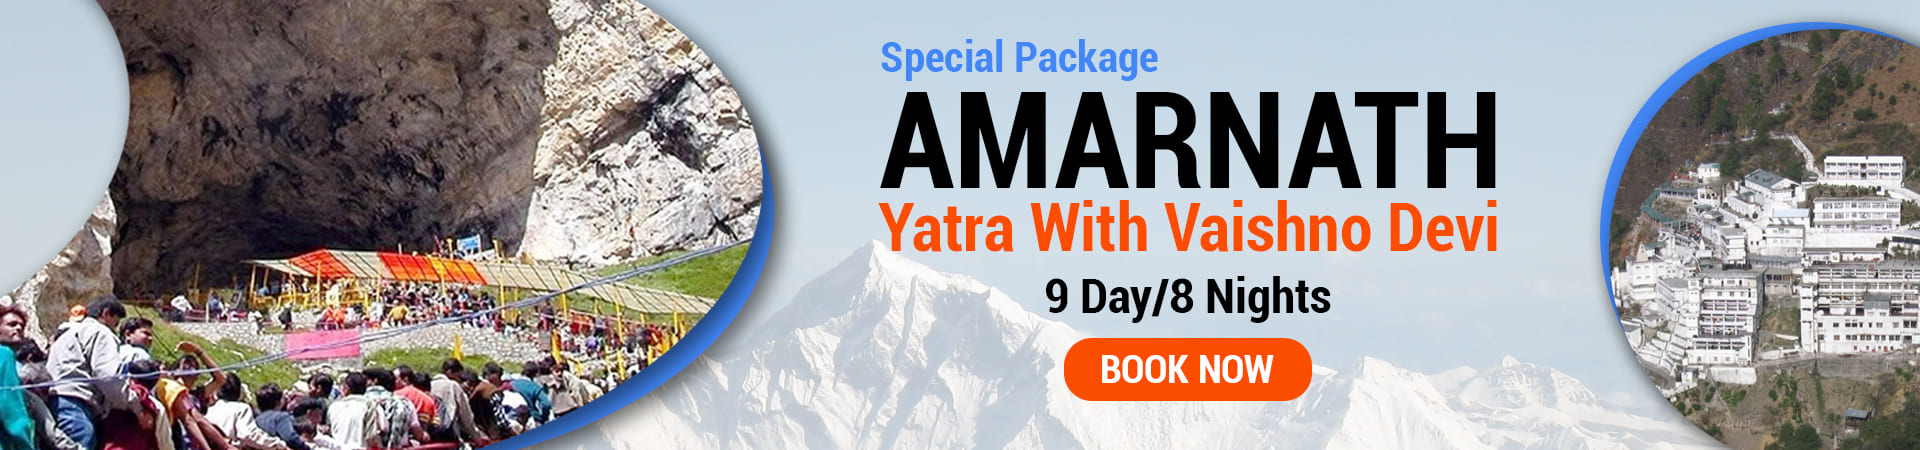 Special package for Amarnath with VaishnoDevi